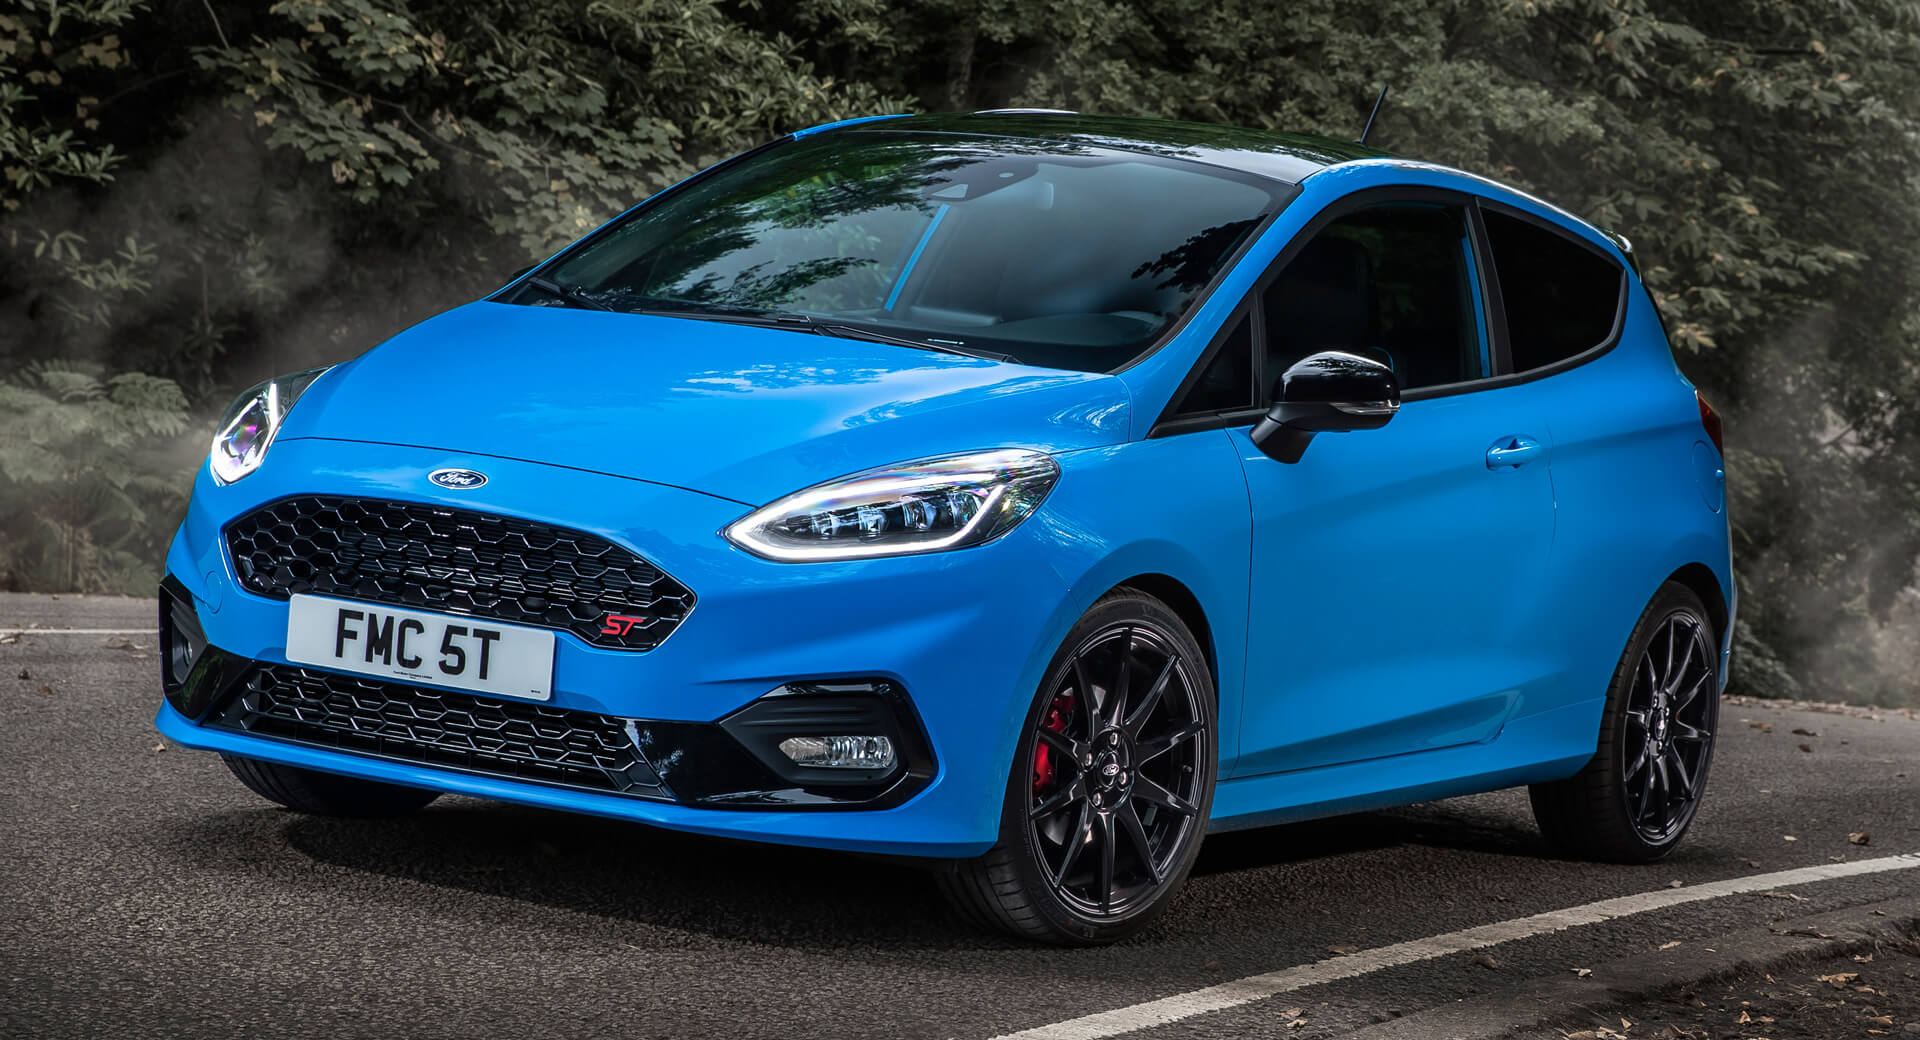 LimitedRun Ford Fiesta ST Edition Offers A Sportier Driving Experience